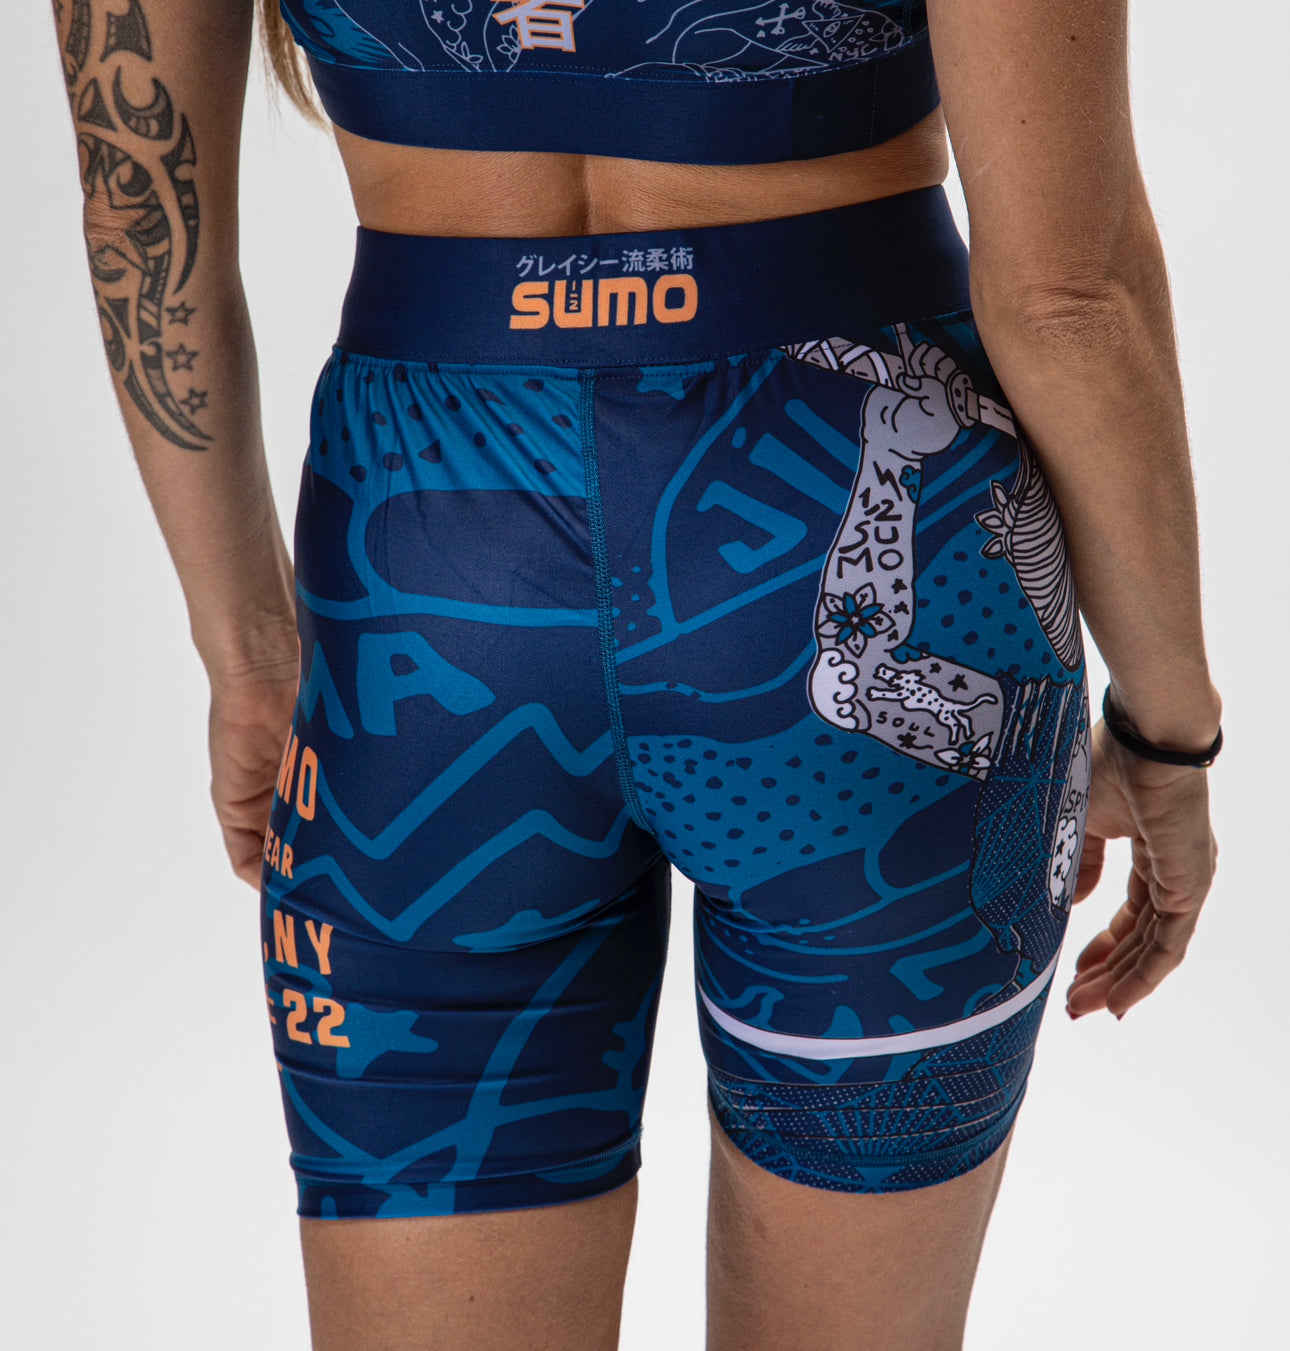 Onna Blue Compression Shorts for Women